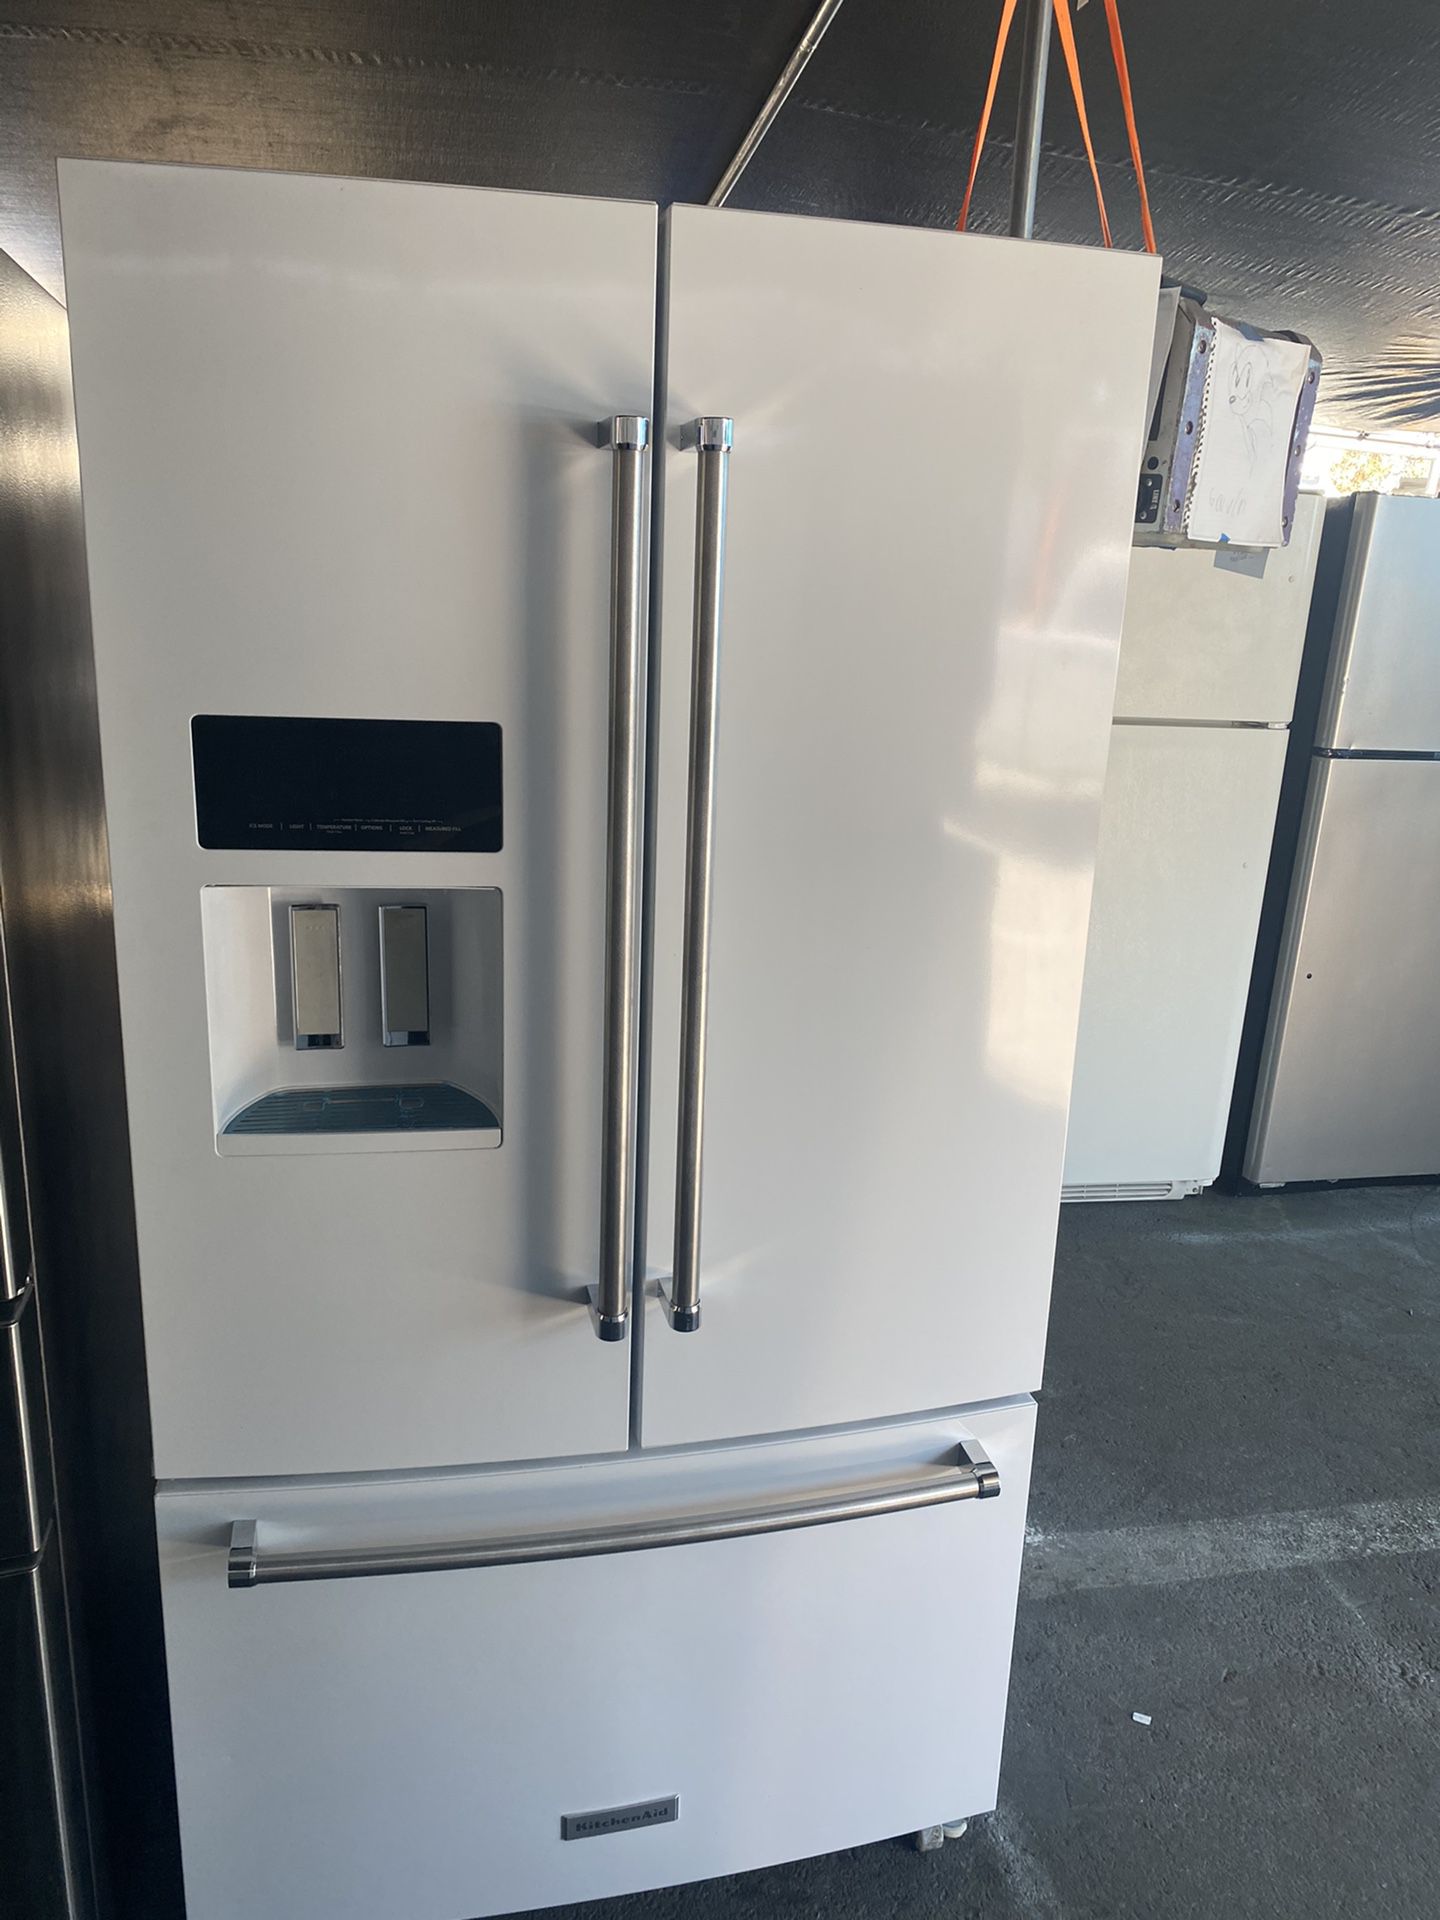 $699KitchenAid White French door refrigerator stainlessj handles includes delivery in the San Fernando Valley the ice water dispenser does not work